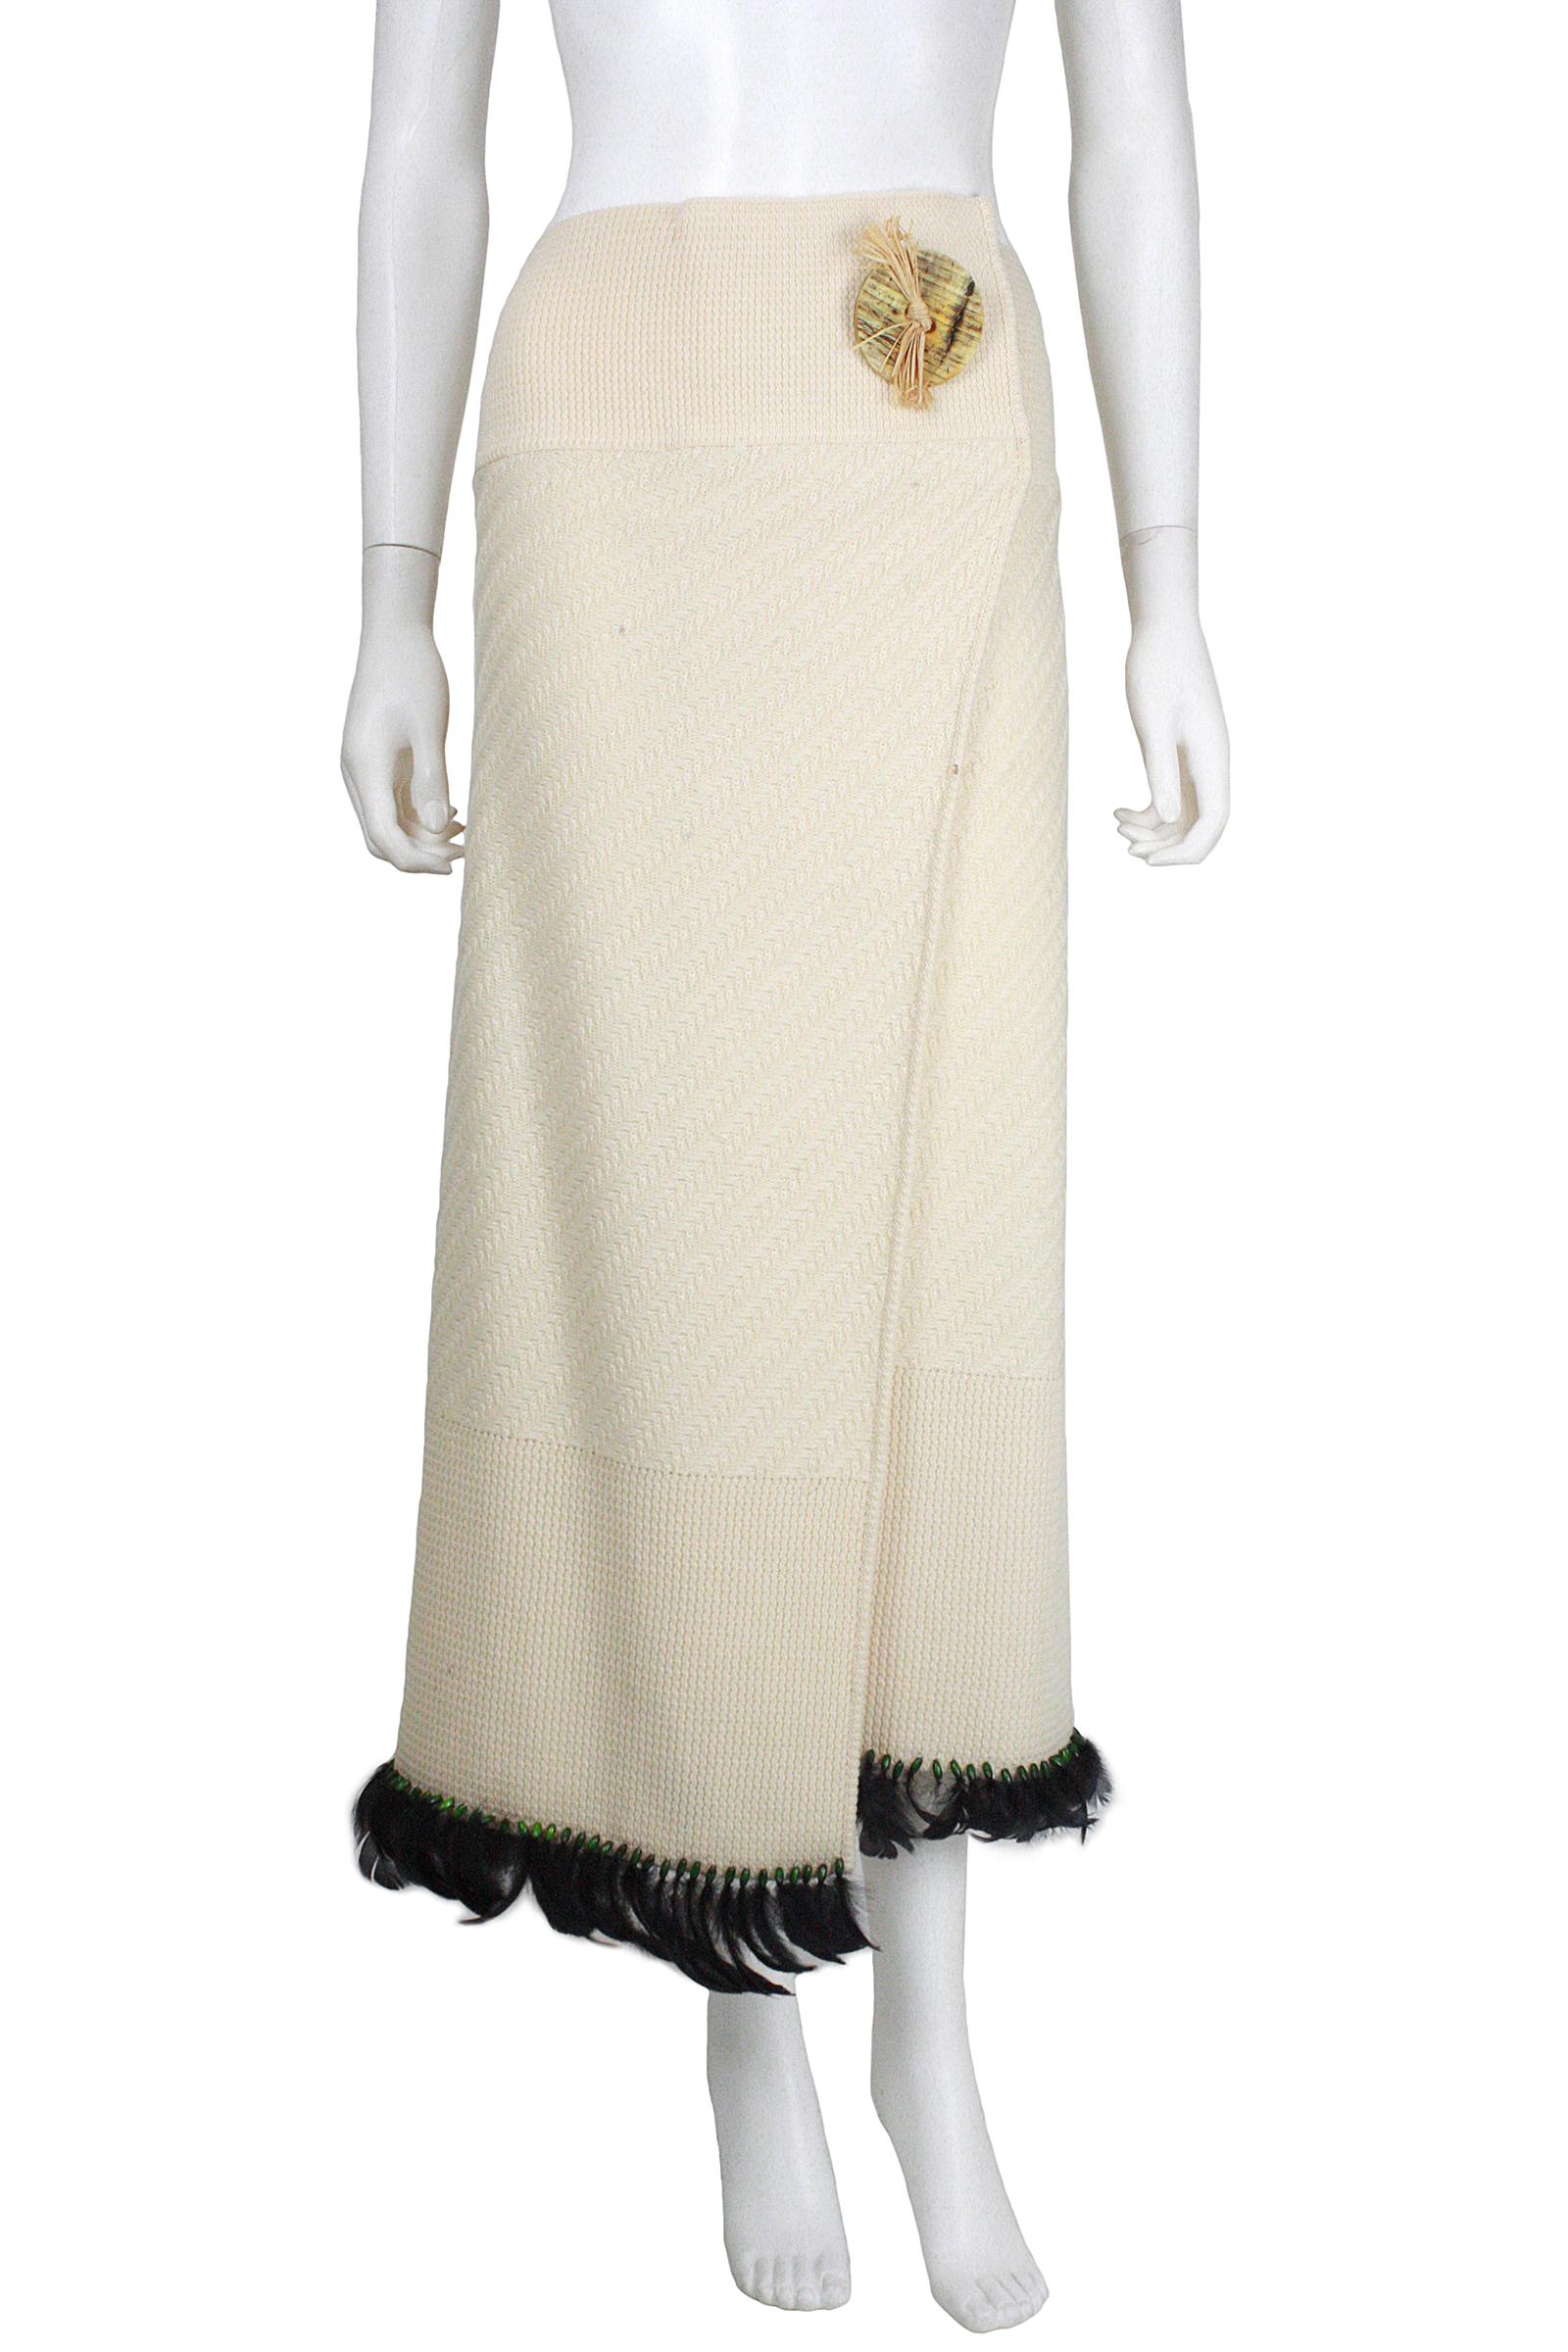 John Galliano 
Wool cream knit wrap skirt 
Large circular ornamental button with straw  
Made in Italy 
Black feather and green bead trim 